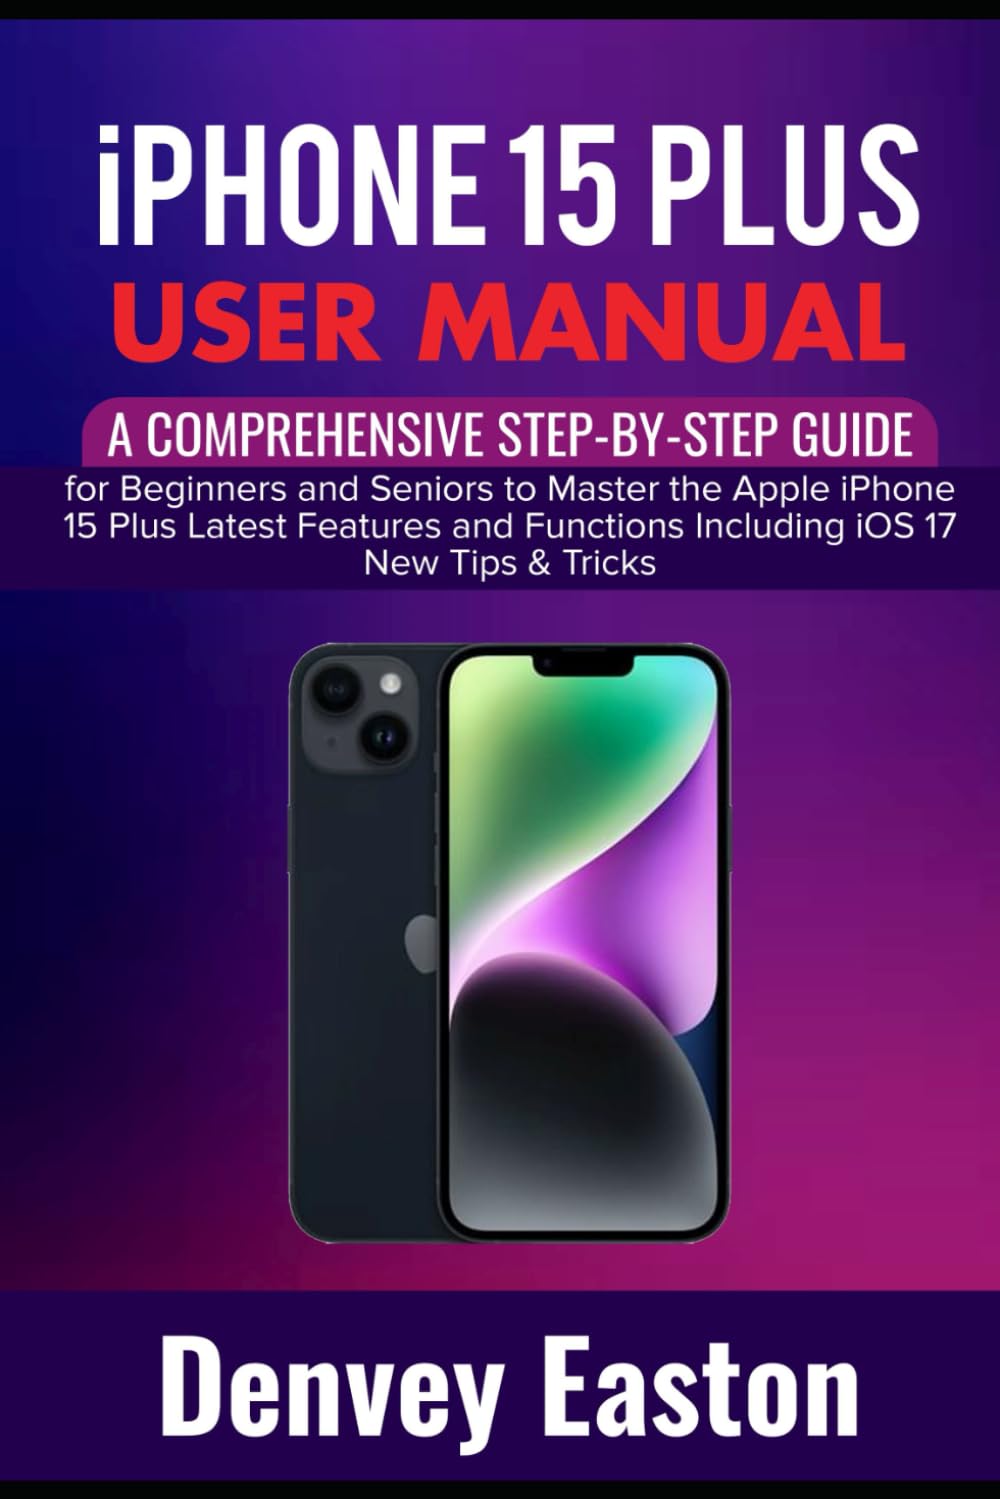 iPhone 15 Plus User Manual: A Comprehensive Step-by-Step Guide for Beginners and Seniors to Master the Apple iPhone 15 Plus Latest Features and Functions Including iOS 17 New Tips & Tricks